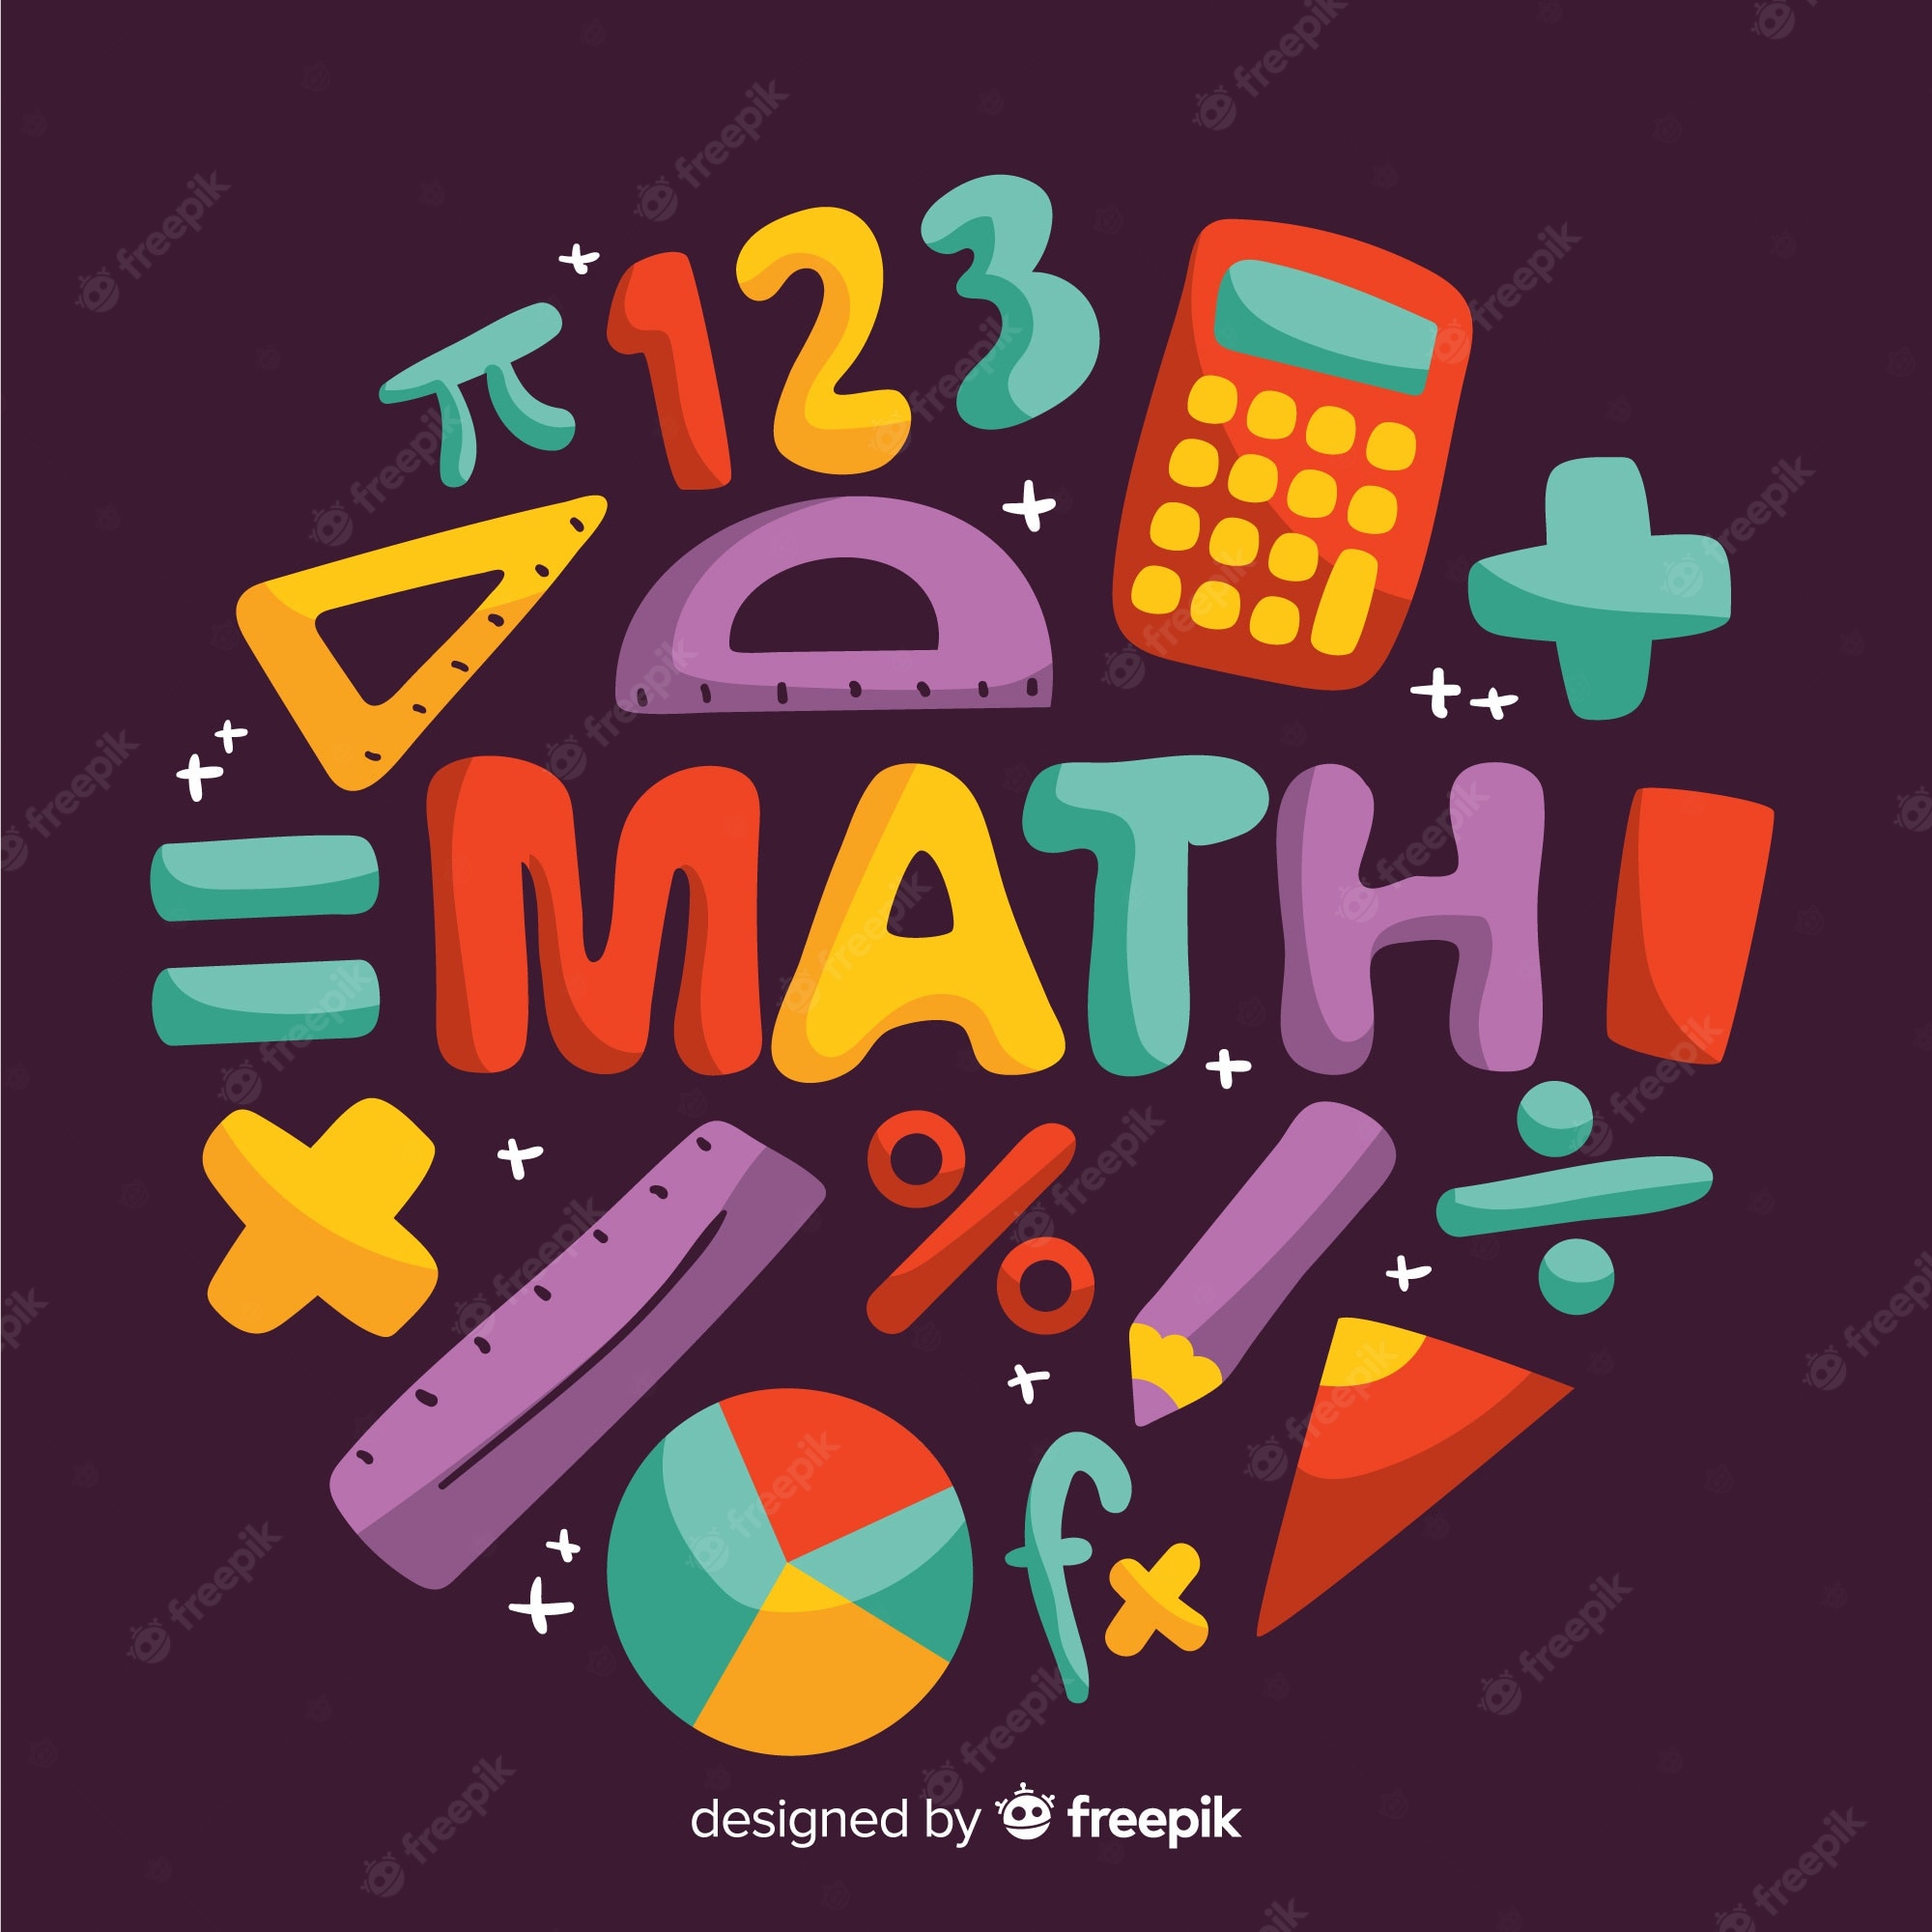 Operations With Rational Numbers - Class 4 - Quizizz